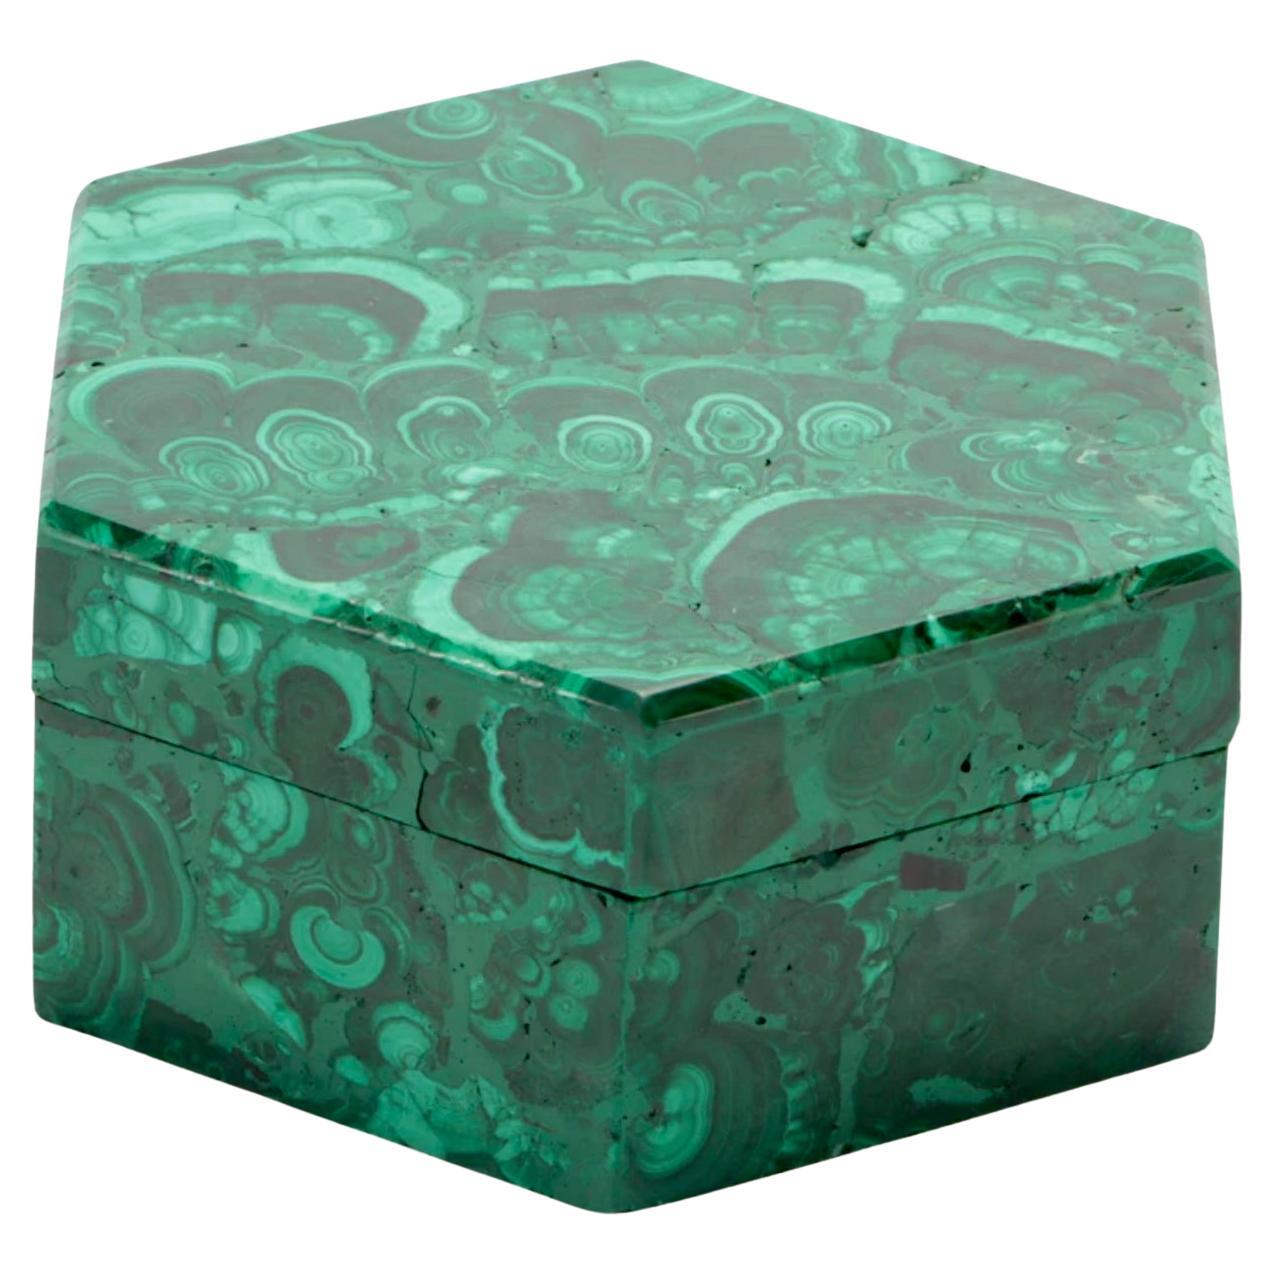 Handcrafted Solid Malachite Hexagonal Lidded Box For Sale